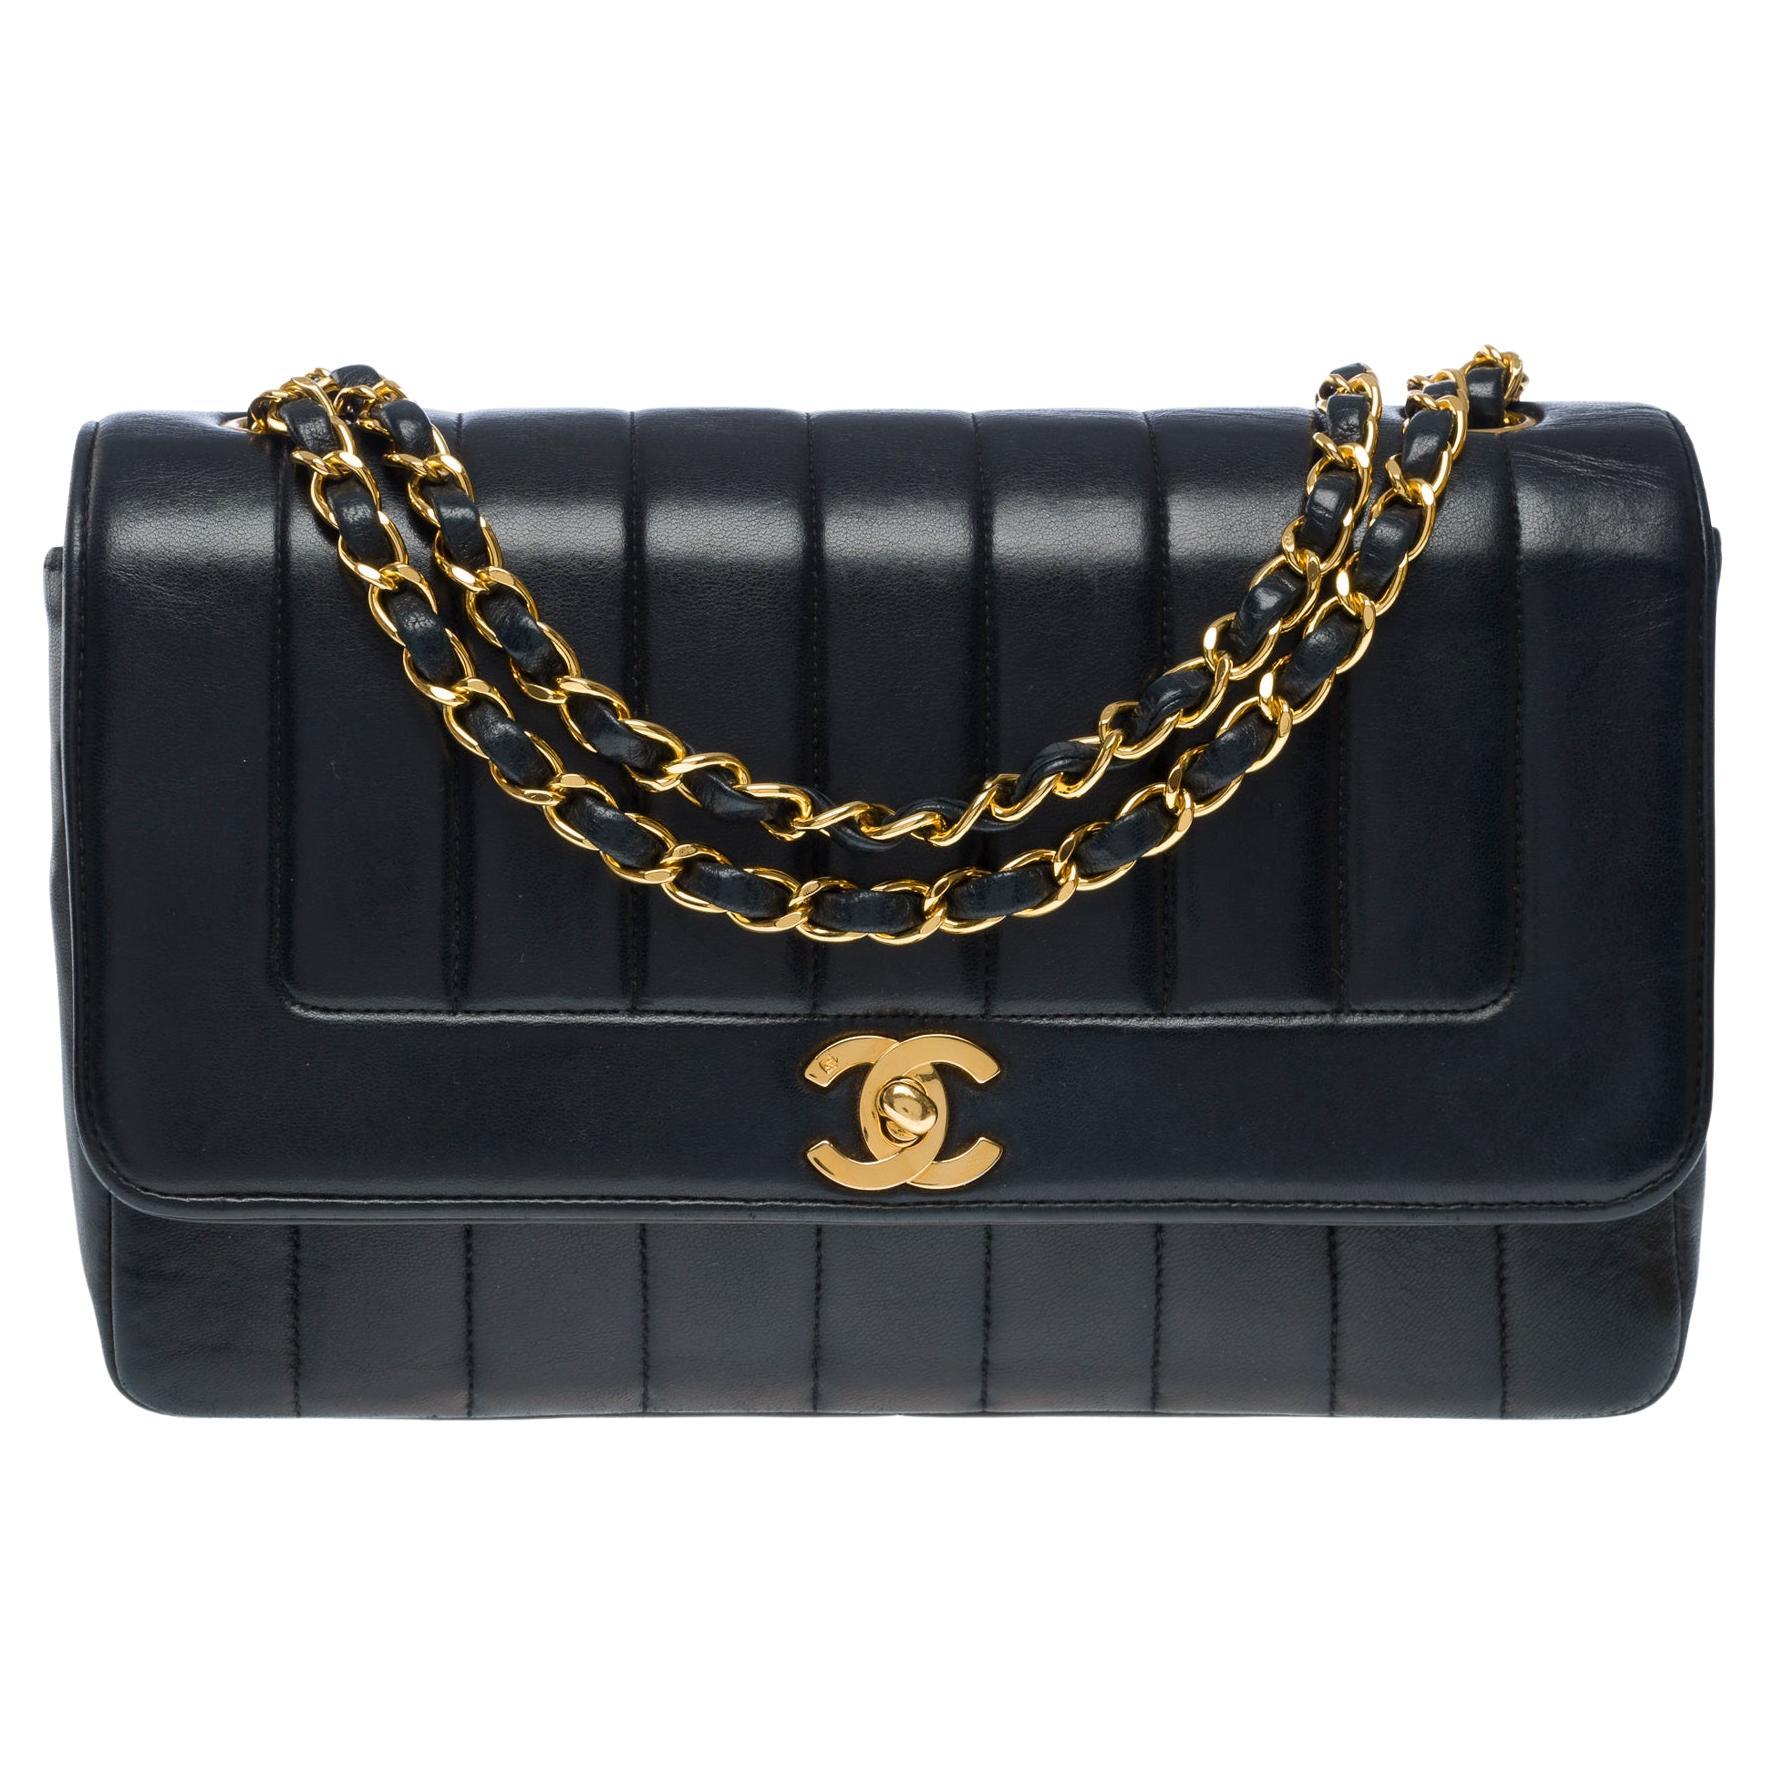 Gorgeous Chanel Diana Shoulder Flap bag in black quilted lambskin leather, GHW For Sale